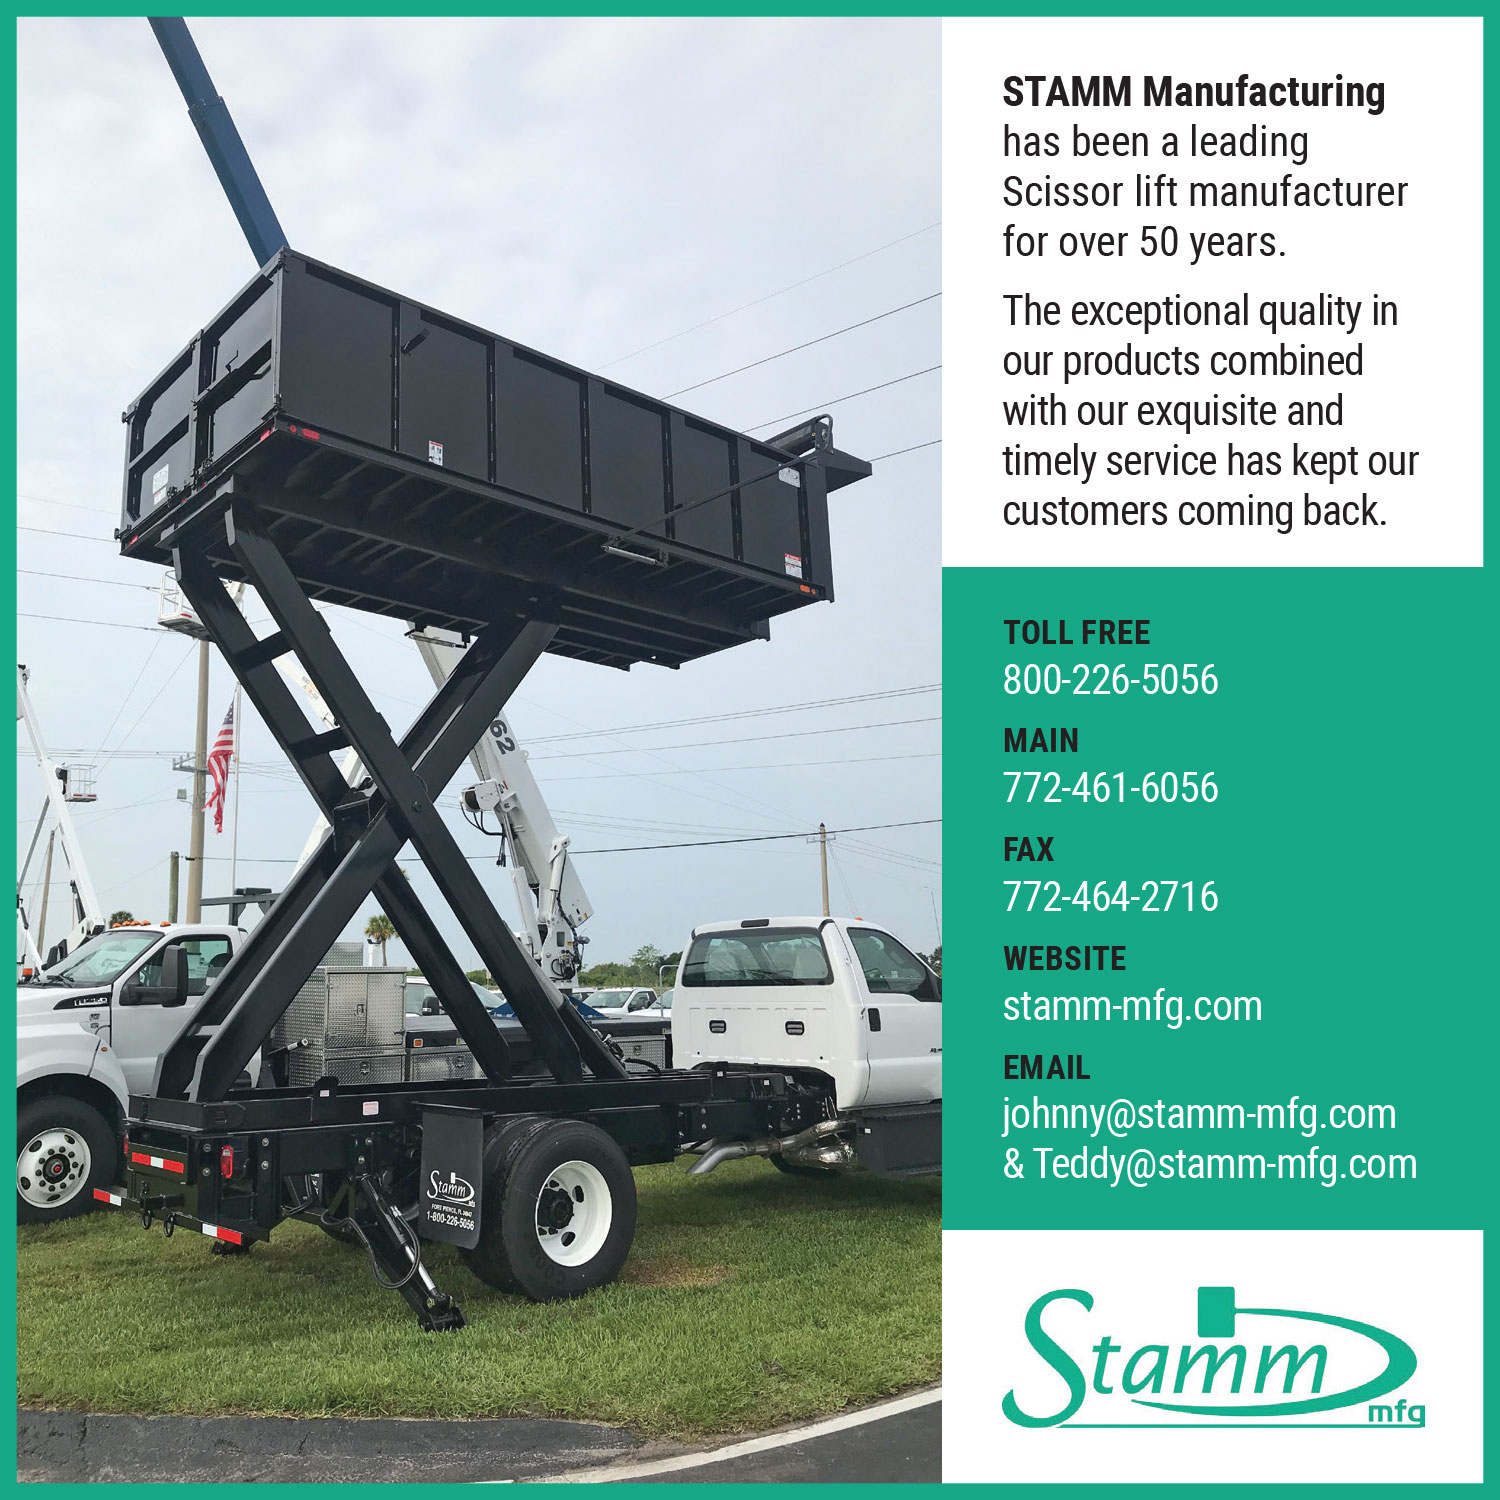 STAMM MFG A LEADING SCISSOR LIFT MANUFACTURER FOR OVER 50 YEARS!